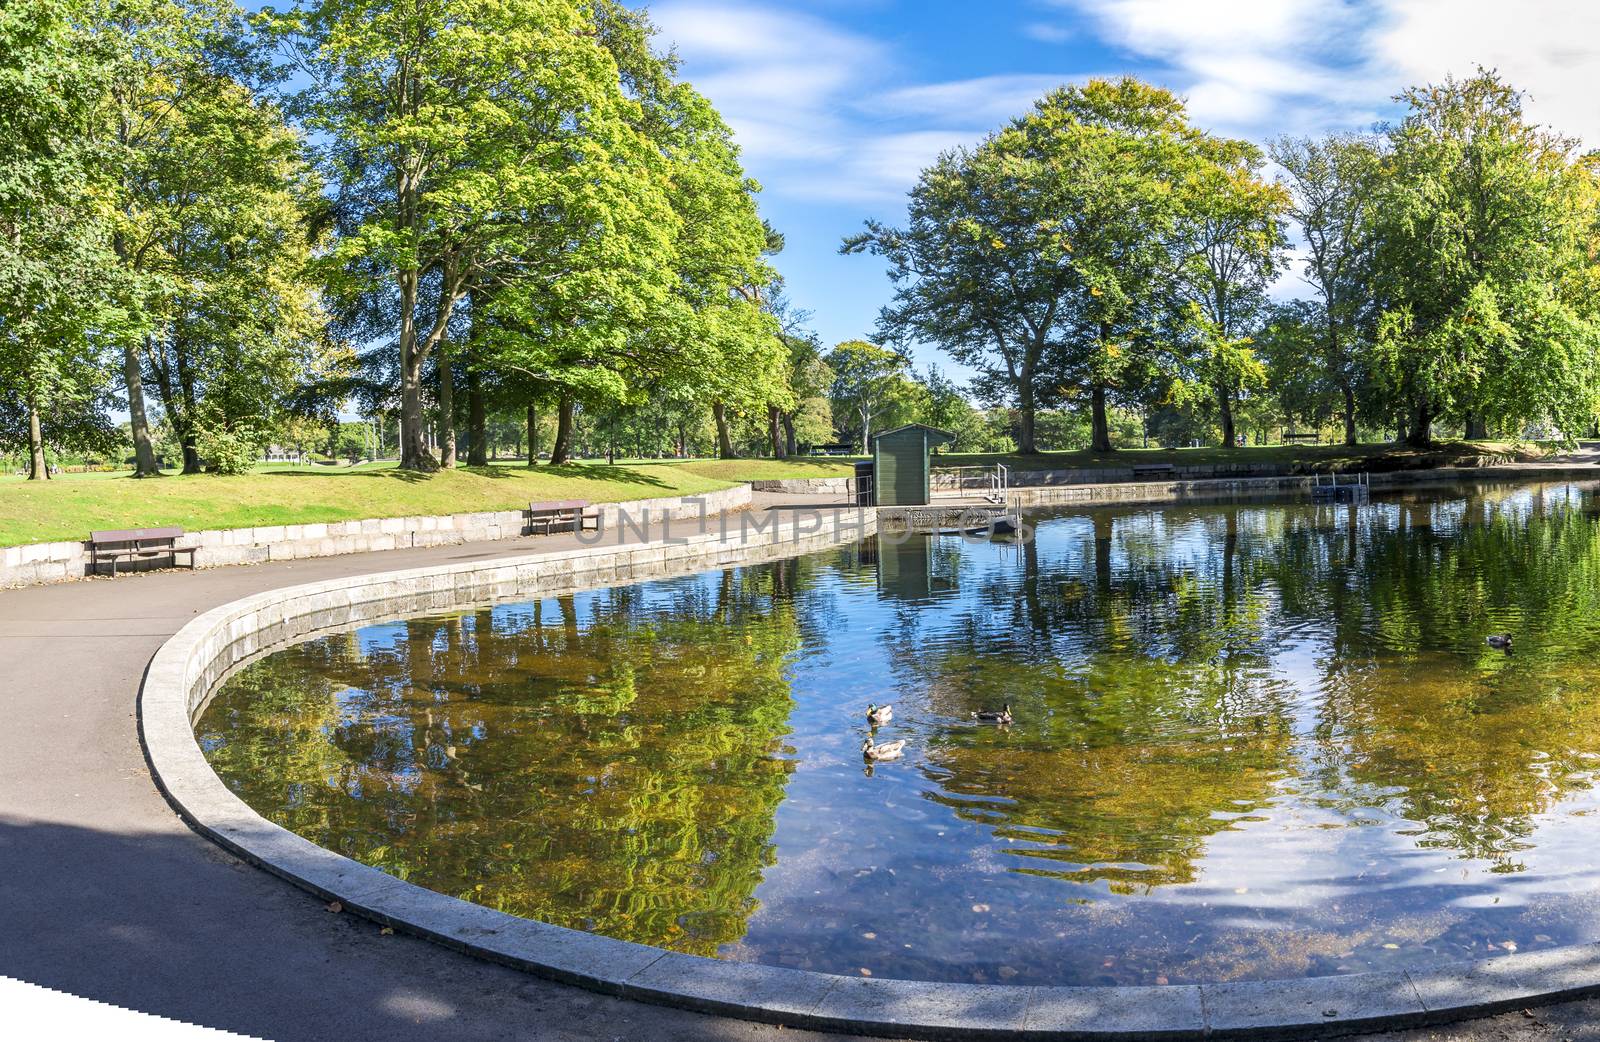 A view of a small shallow pond in the centre of Duthie Park, Aberdeen, Scotland